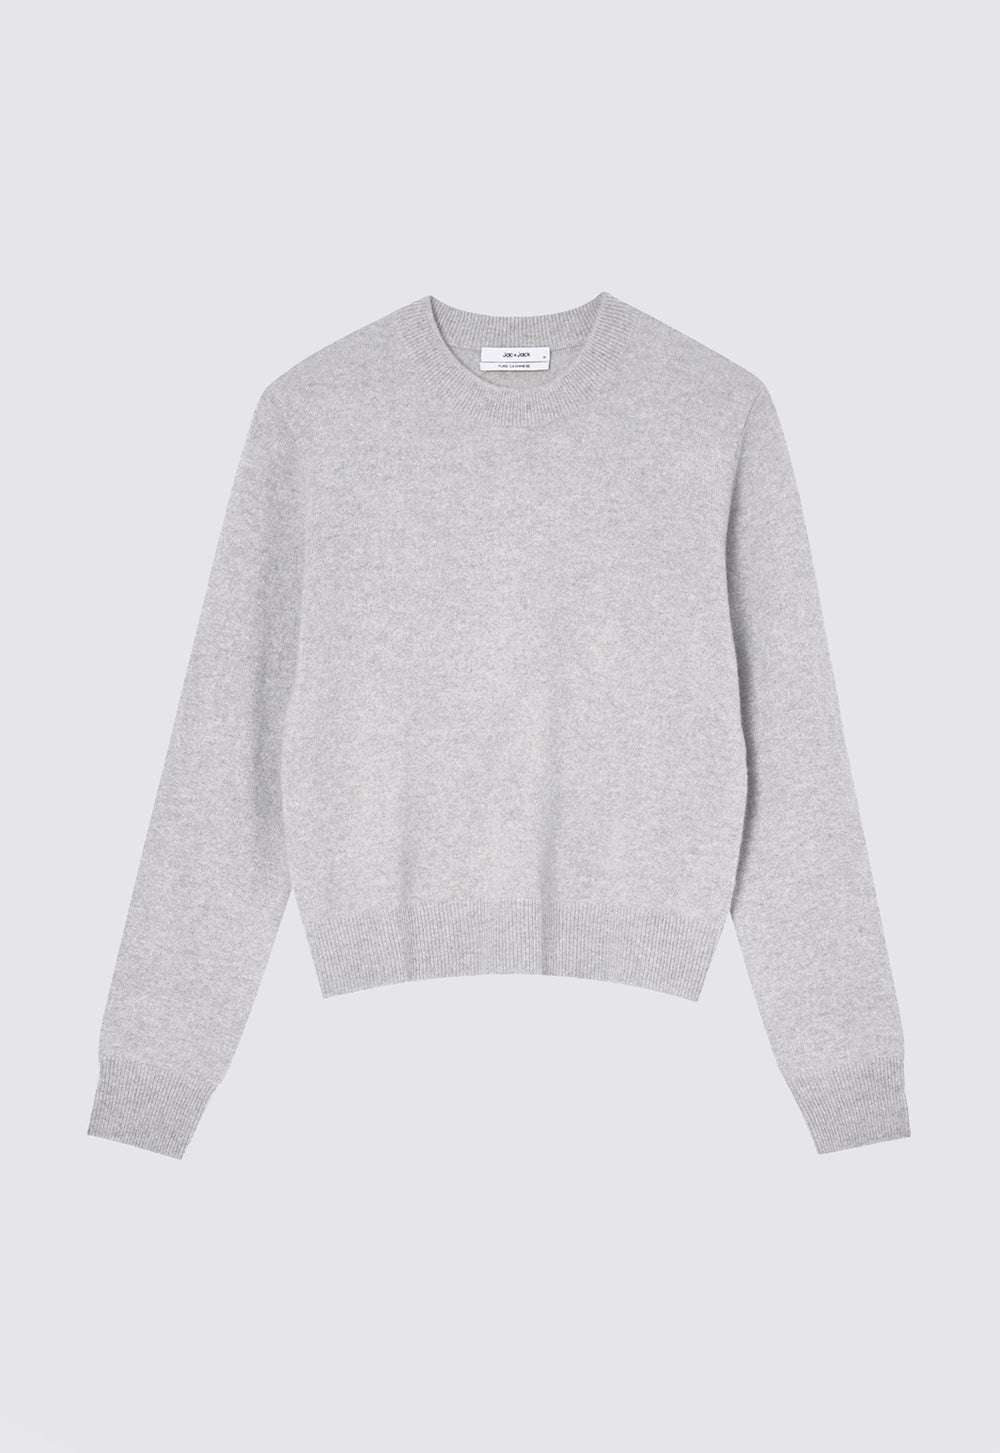 Jac+Jack Peter Cashmere Sweater - Pale Grey Marle